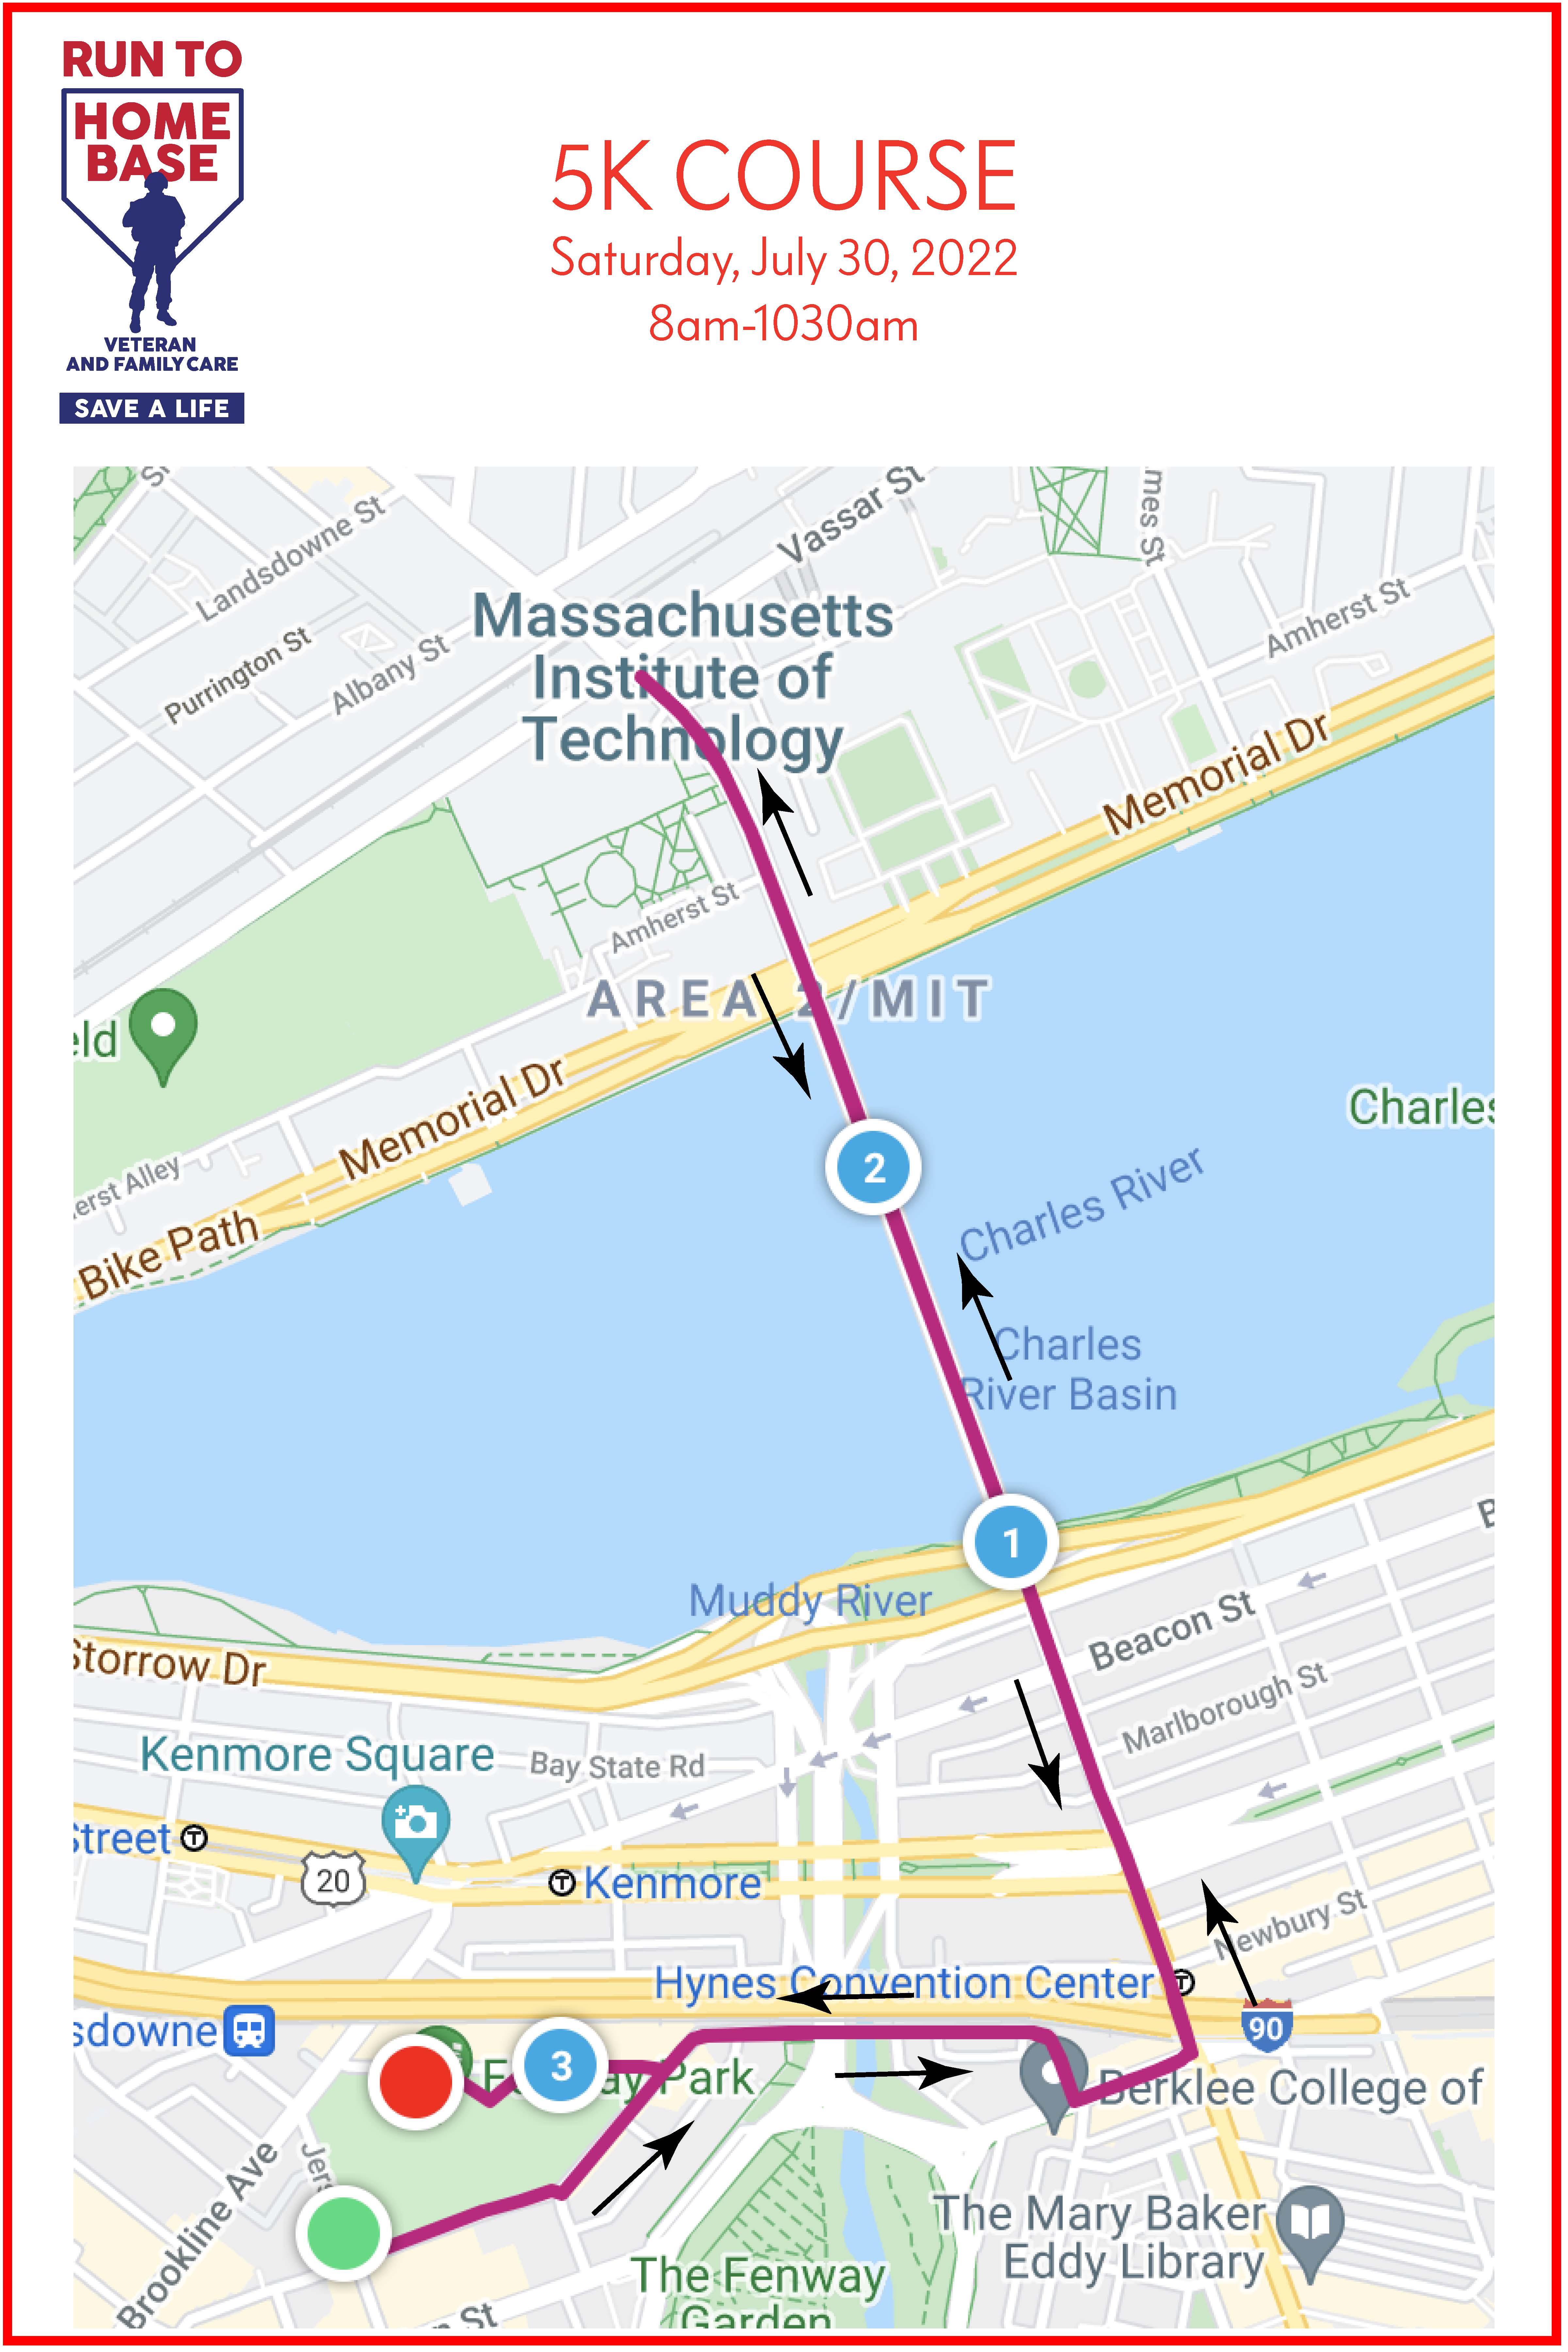 Expect traffic delays near MIT on Saturday, July 30, due to road race